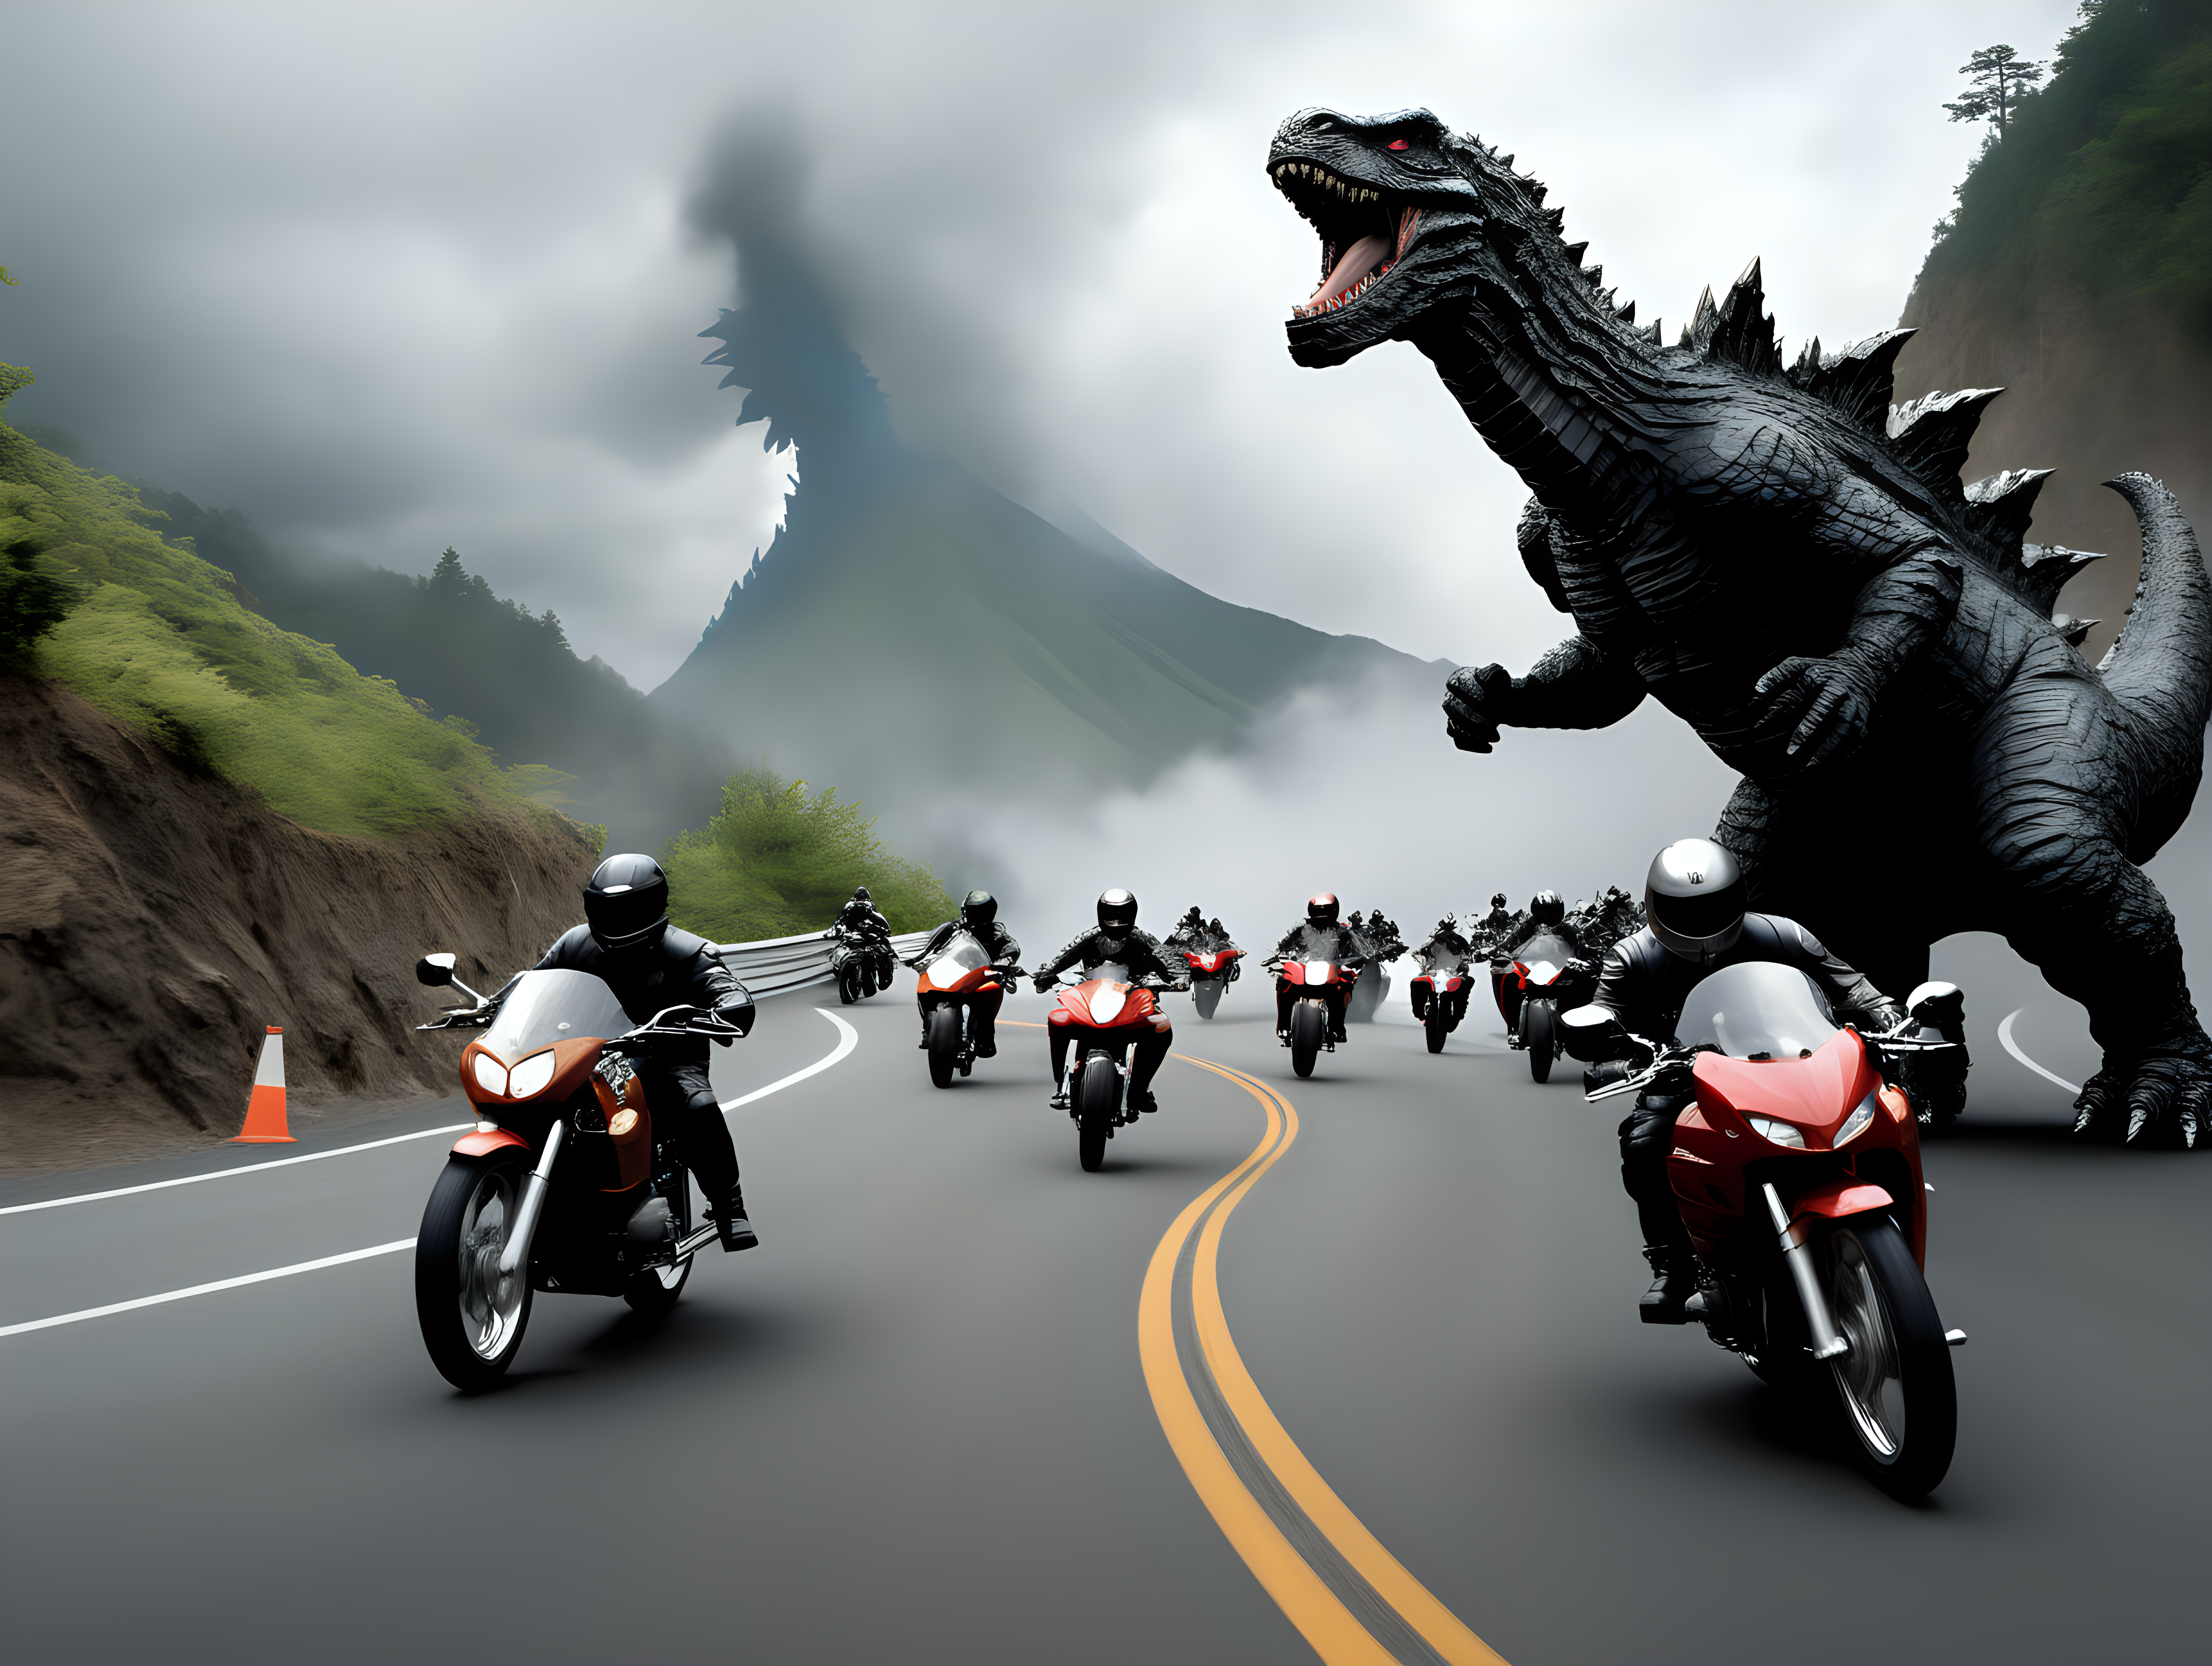 Motorcycles race on winding mountain road chased by Godzilla